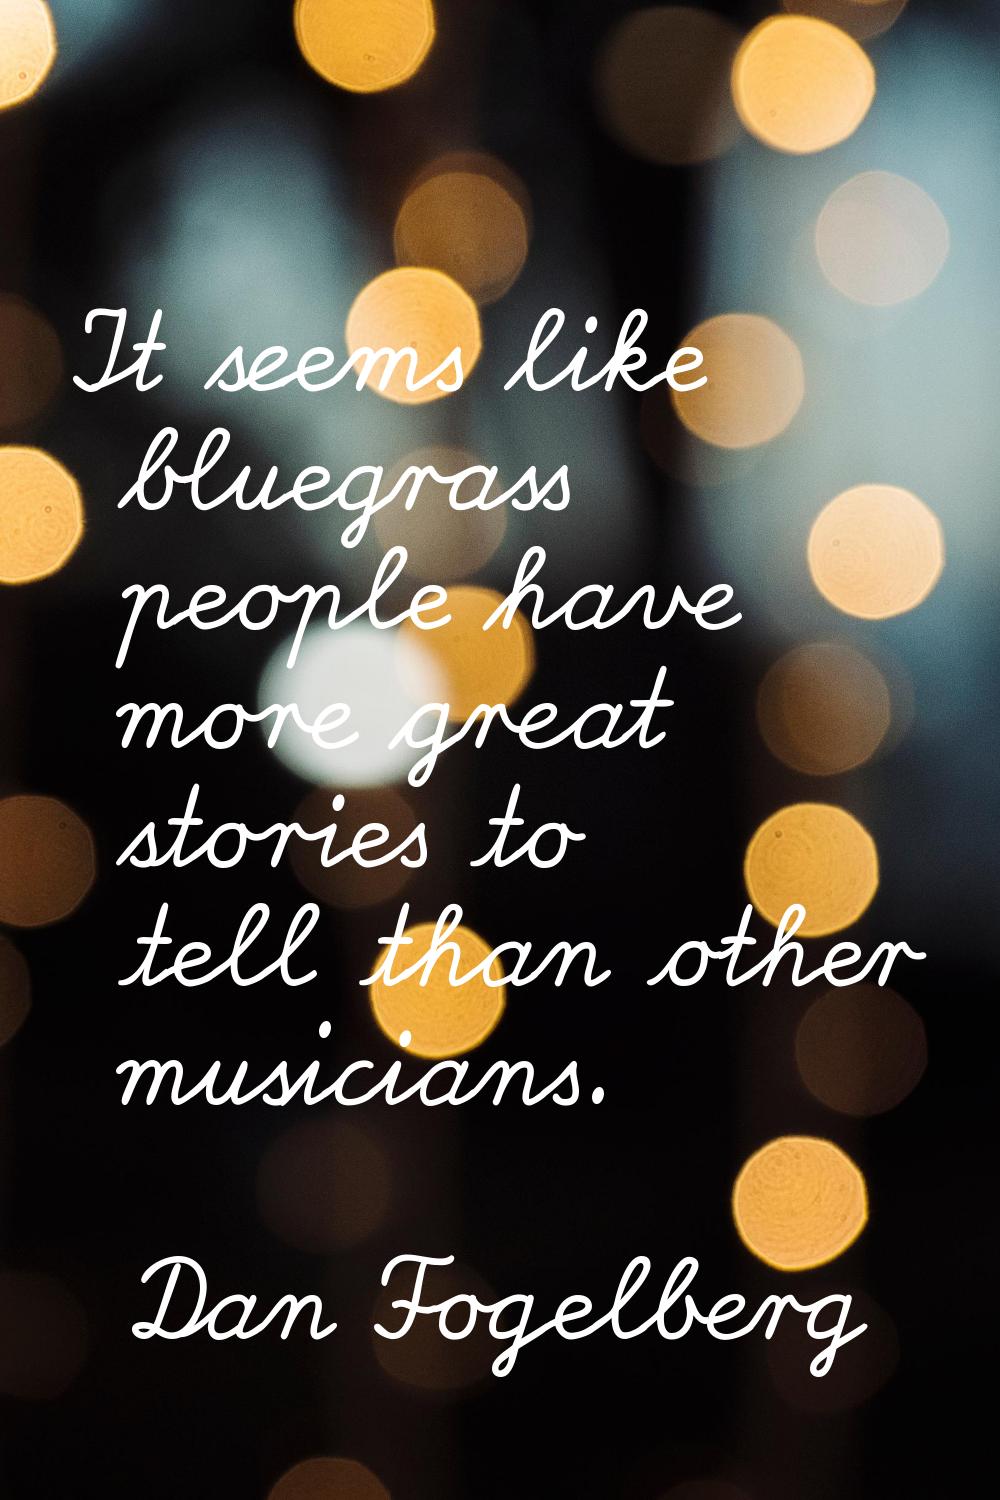 It seems like bluegrass people have more great stories to tell than other musicians.